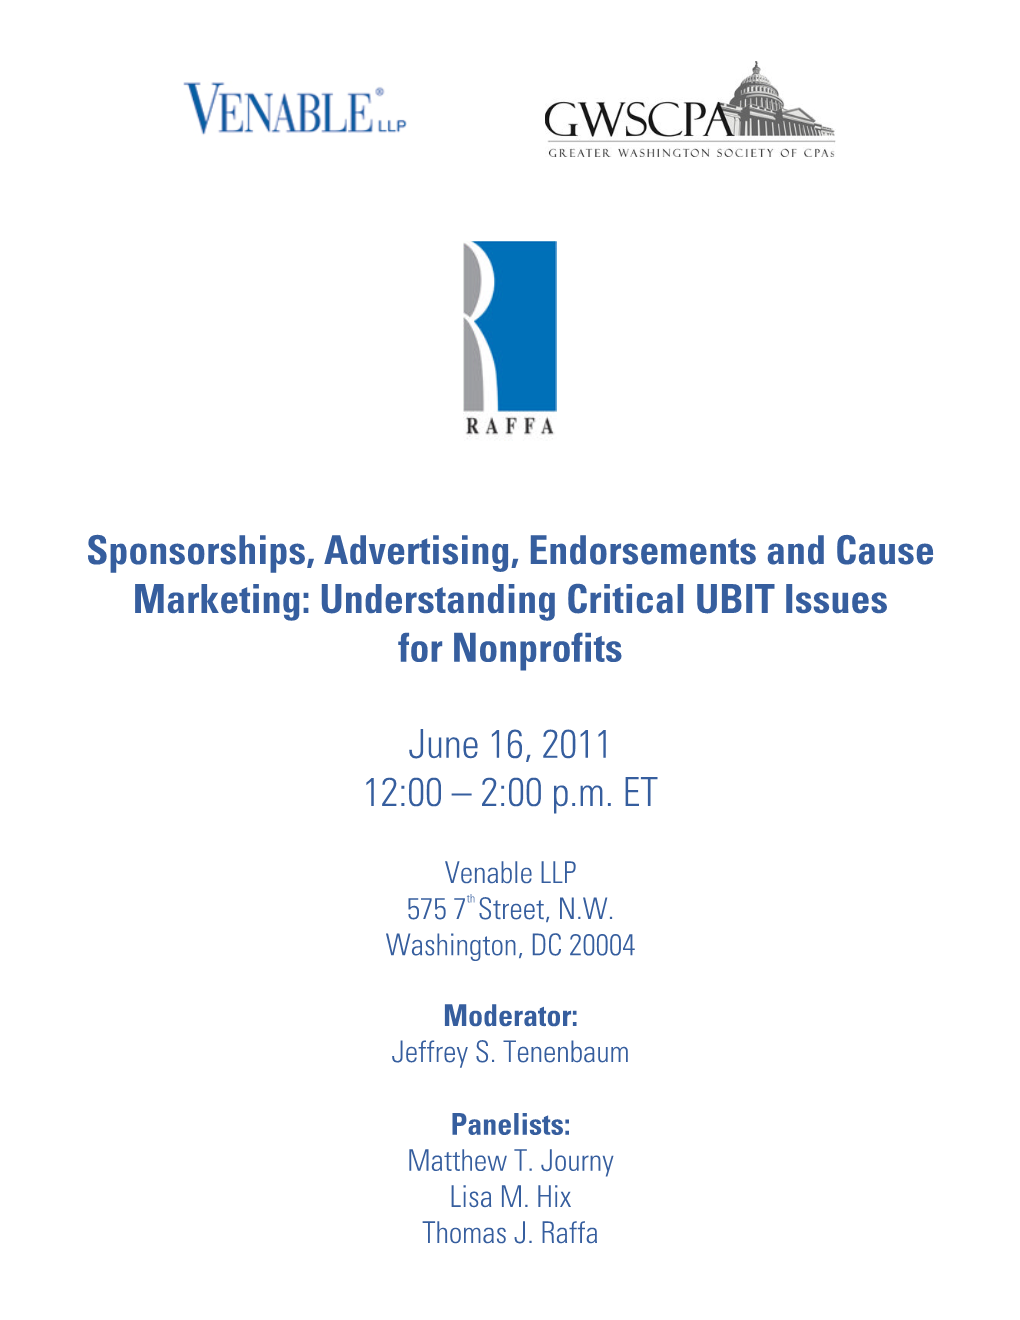 Sponsorships, Advertising, Endorsements and Cause Marketing: Understanding Critical UBIT Issues for Nonprofits